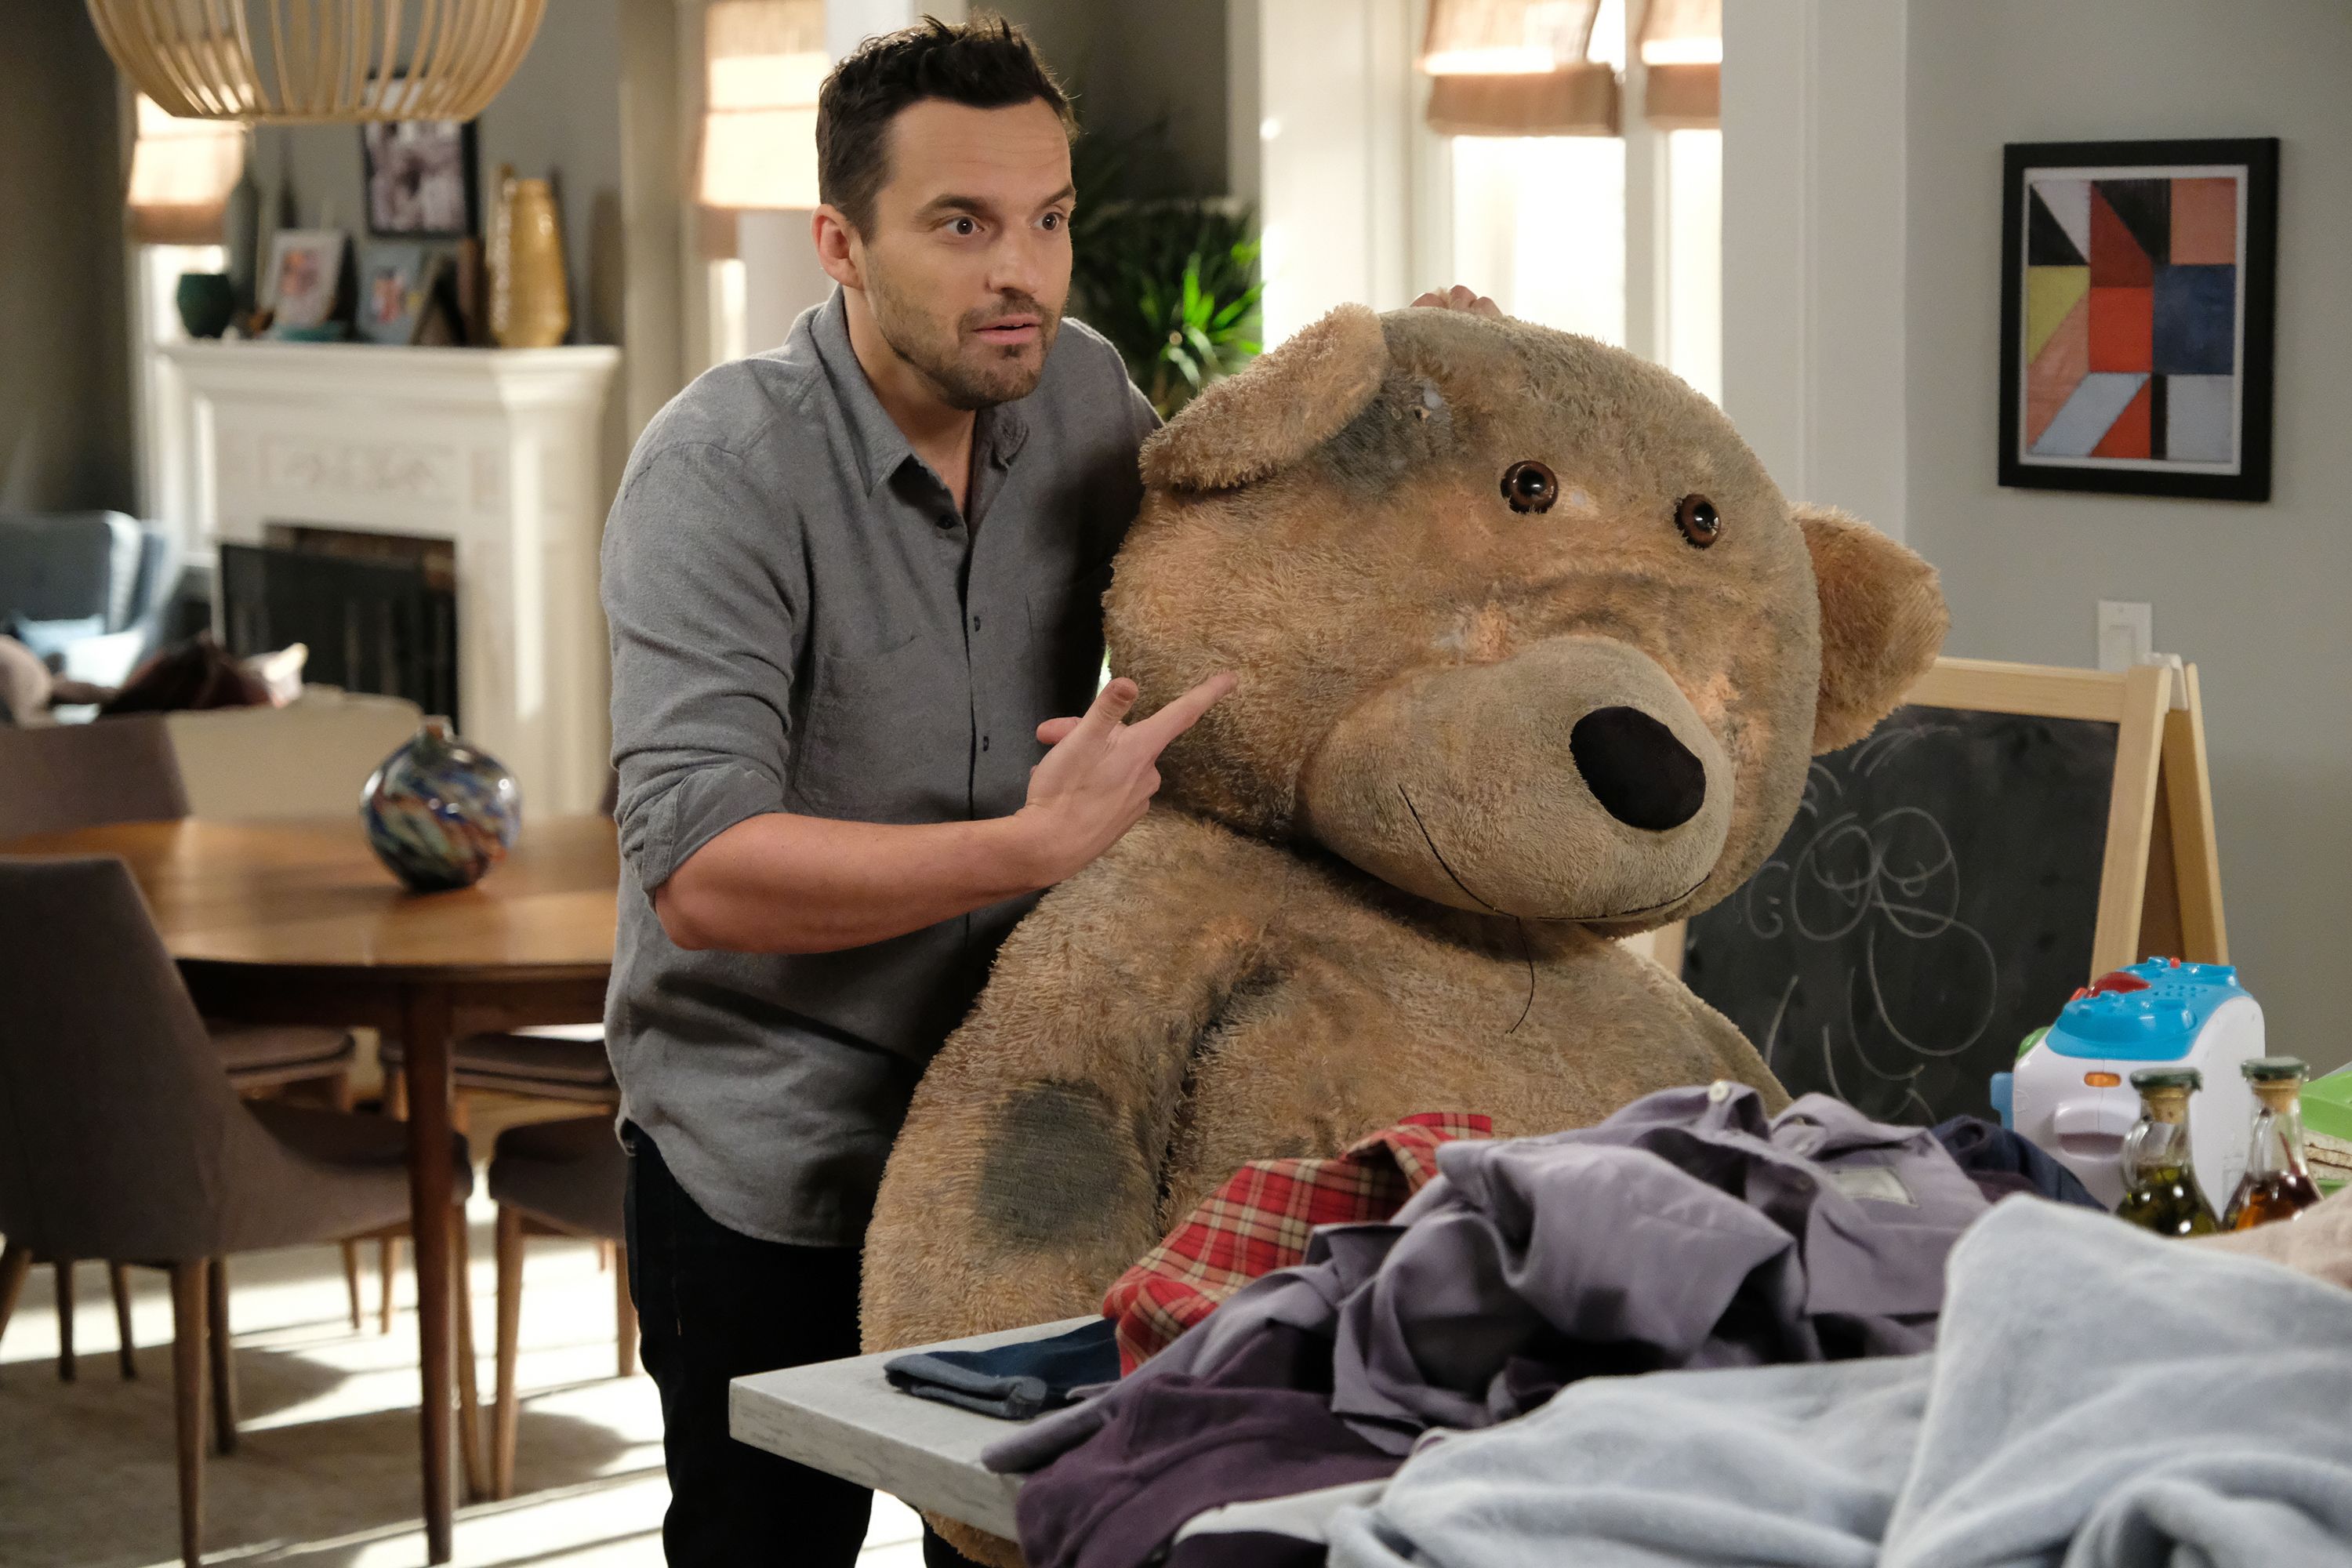 Jake Johnson in "Godparents," the first part of the special "New Girl" Season 7 episode. | Source: Getty Images